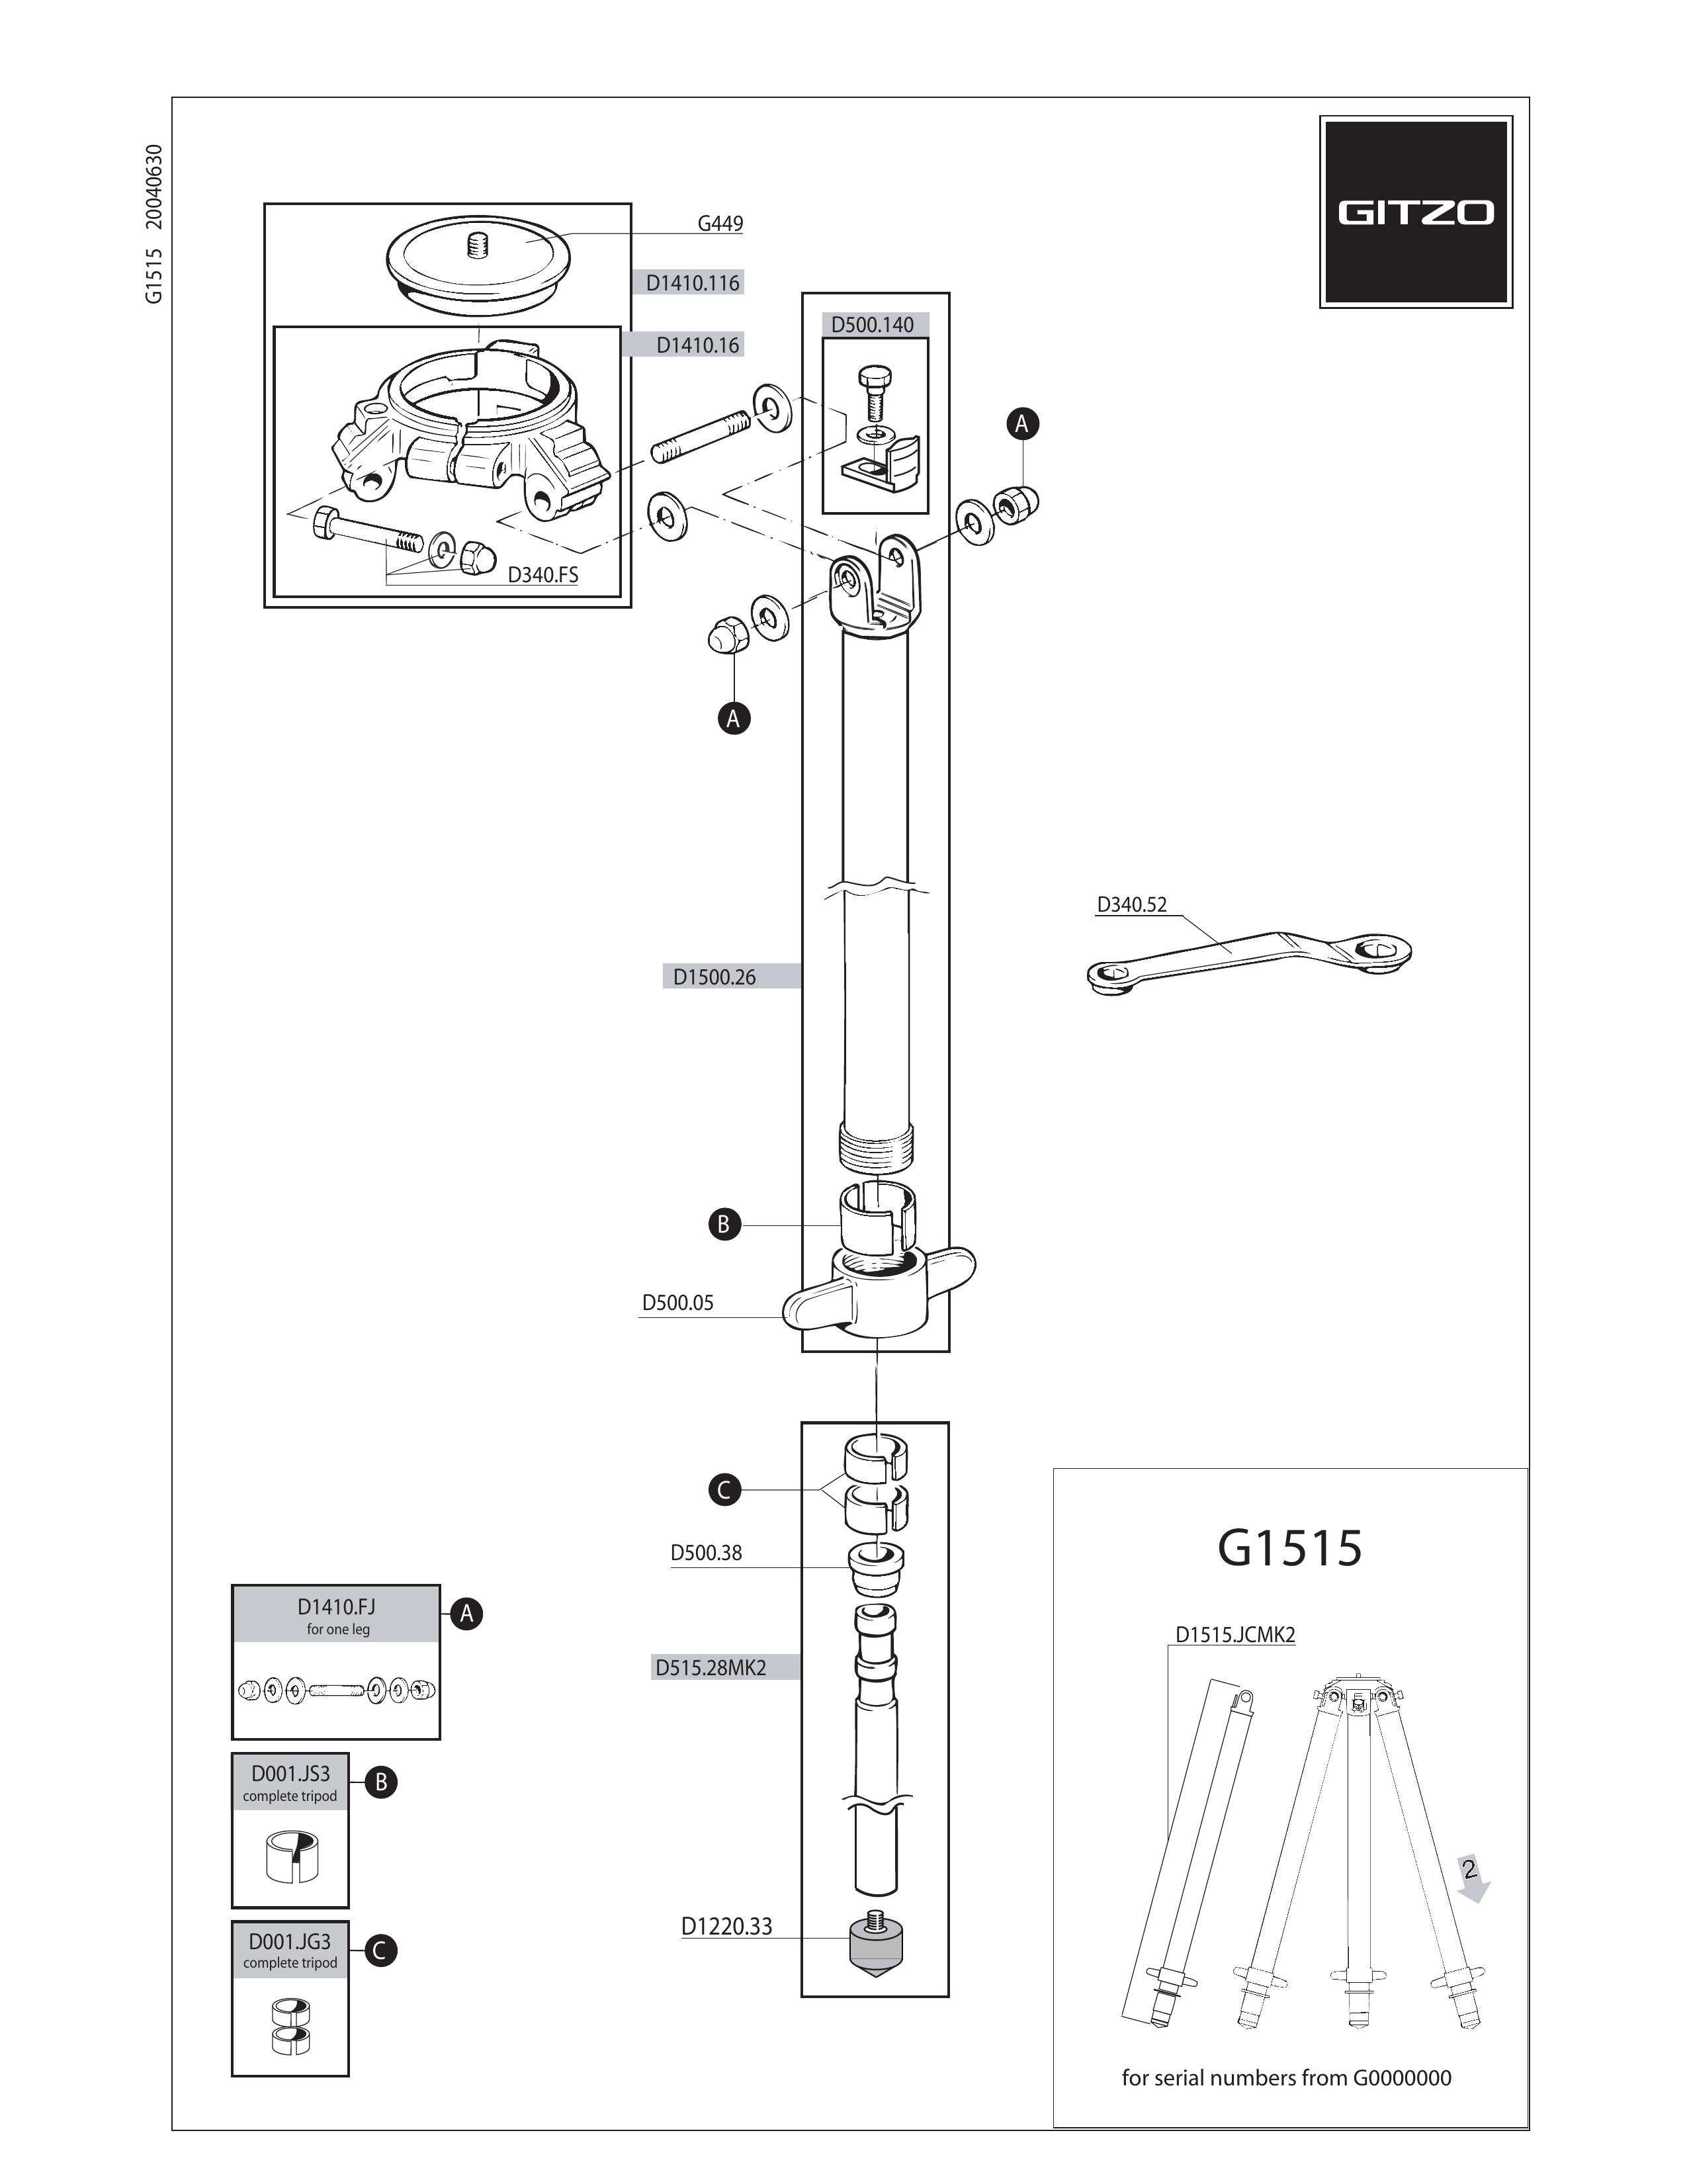 Gitzo G1515 Camcorder Accessories User Manual